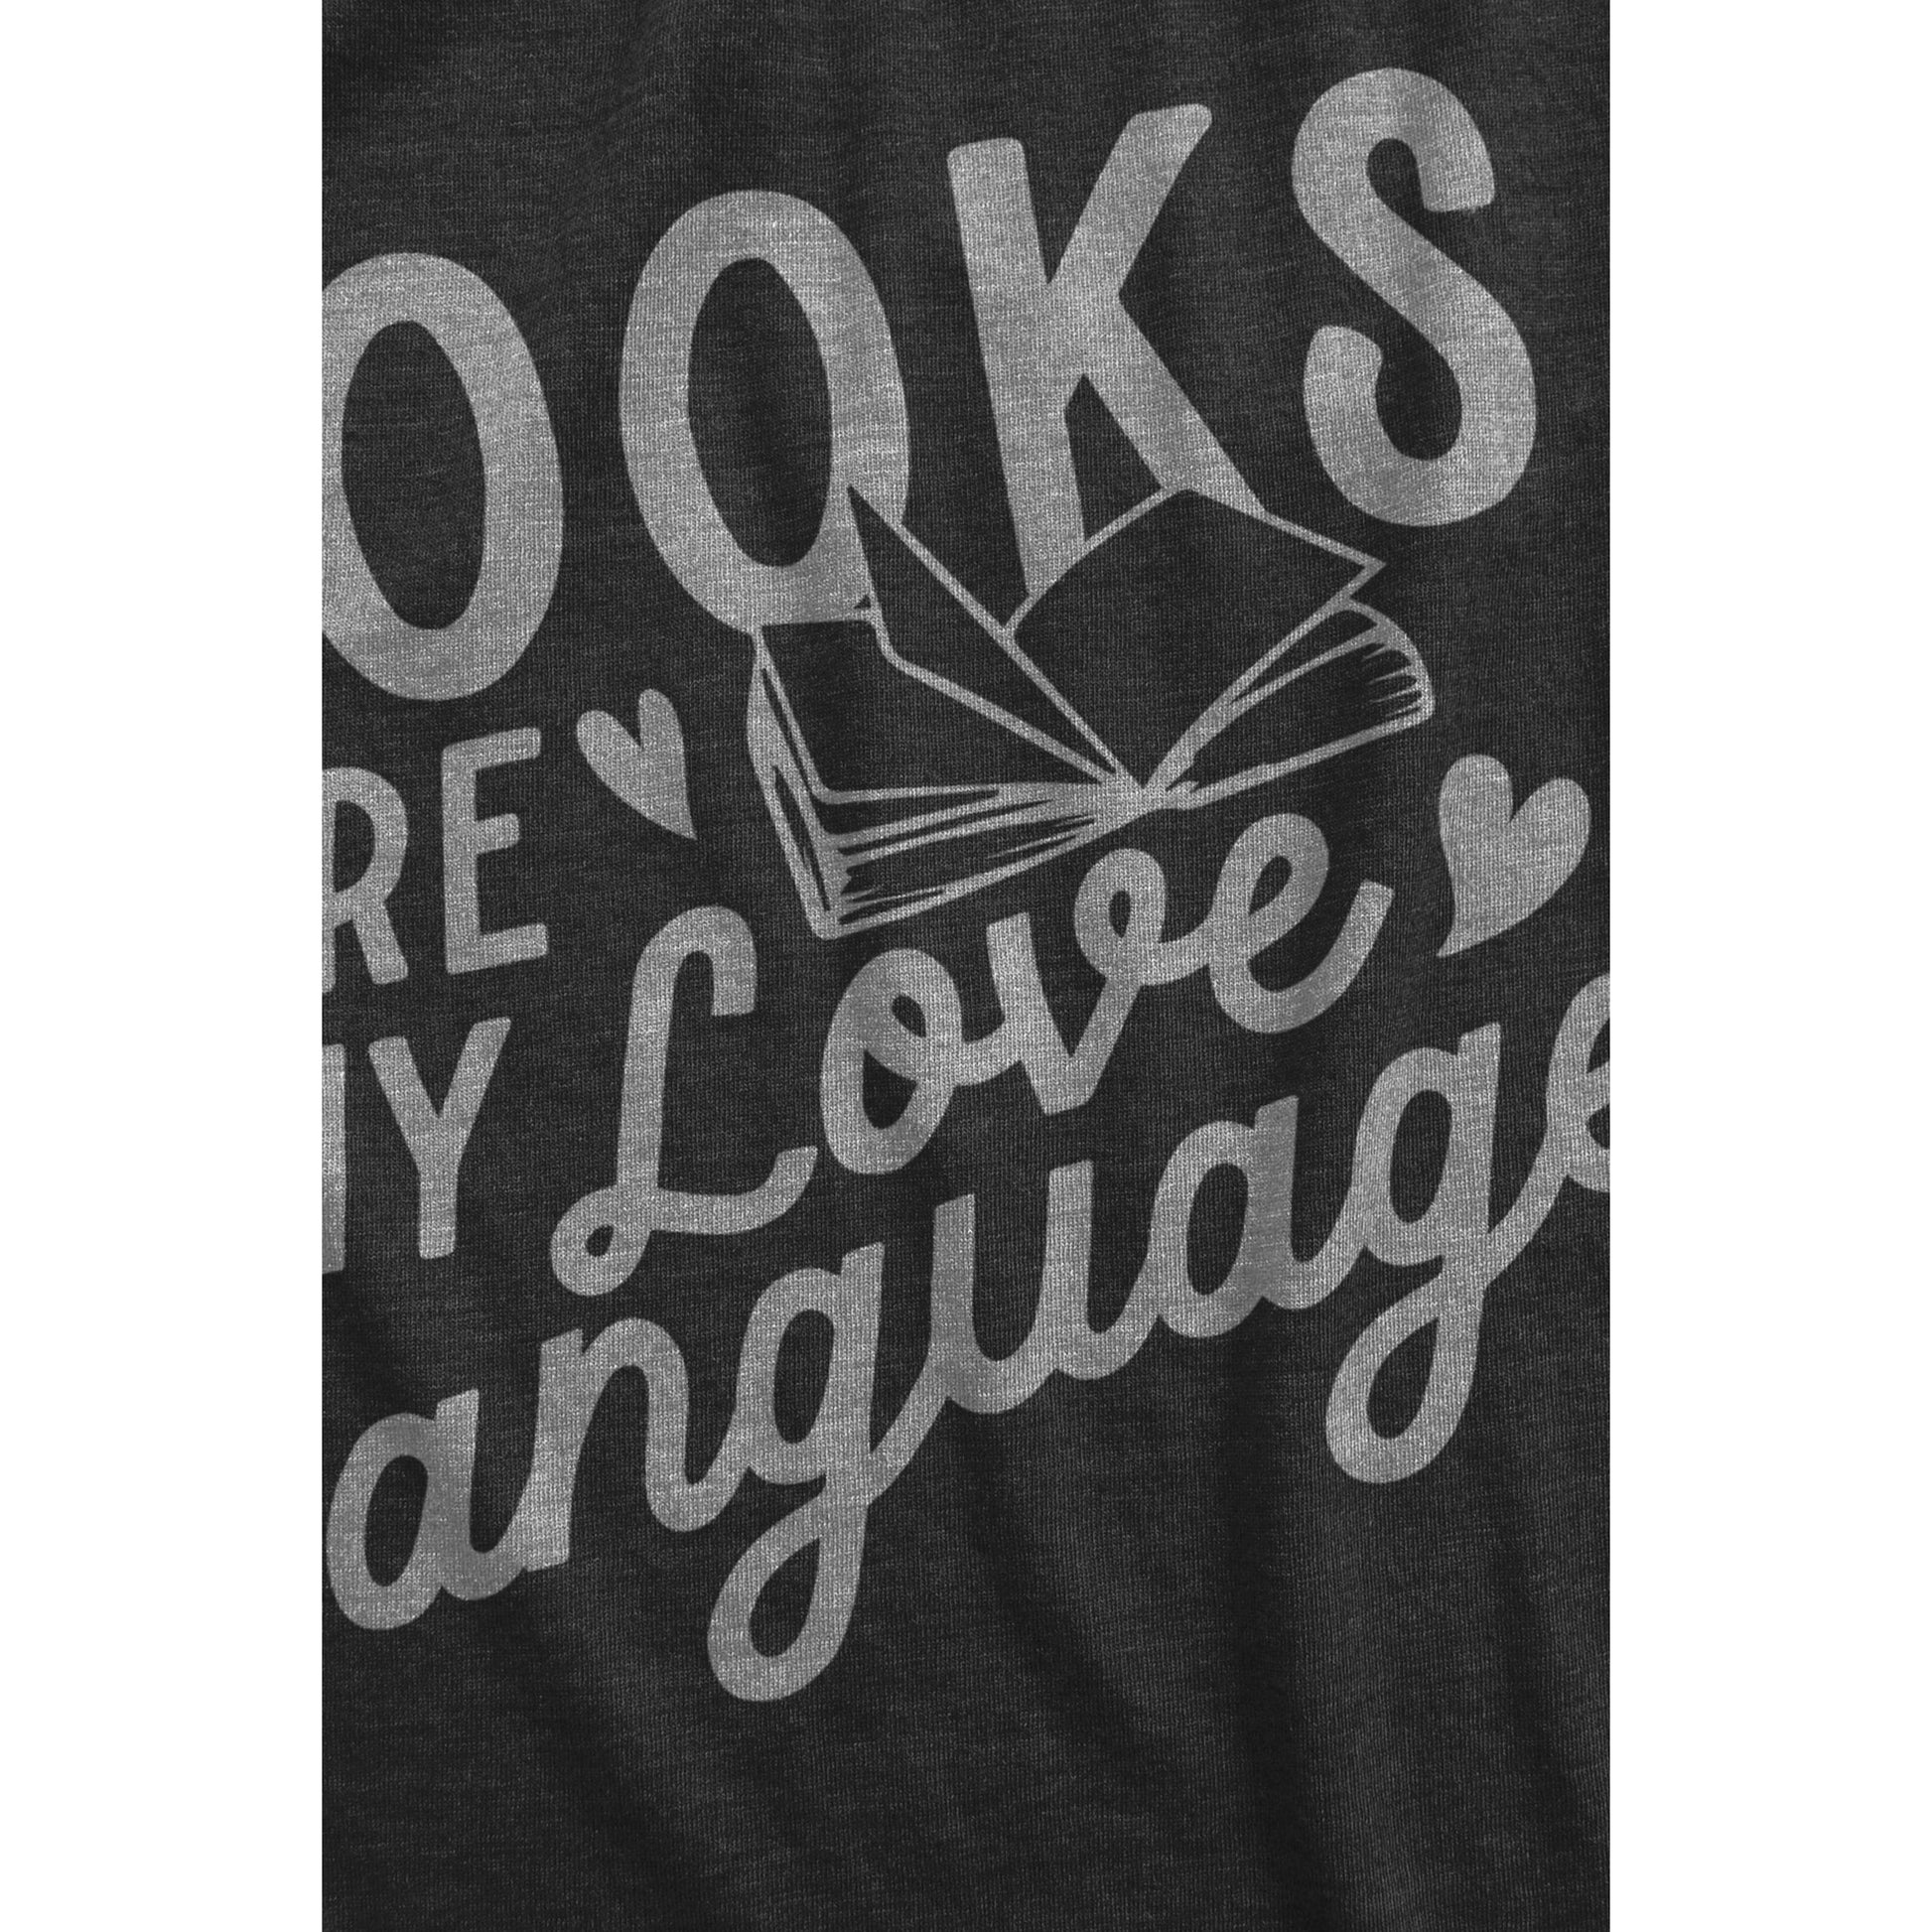 Books Are My Love Language - threadtank | stories you can wear